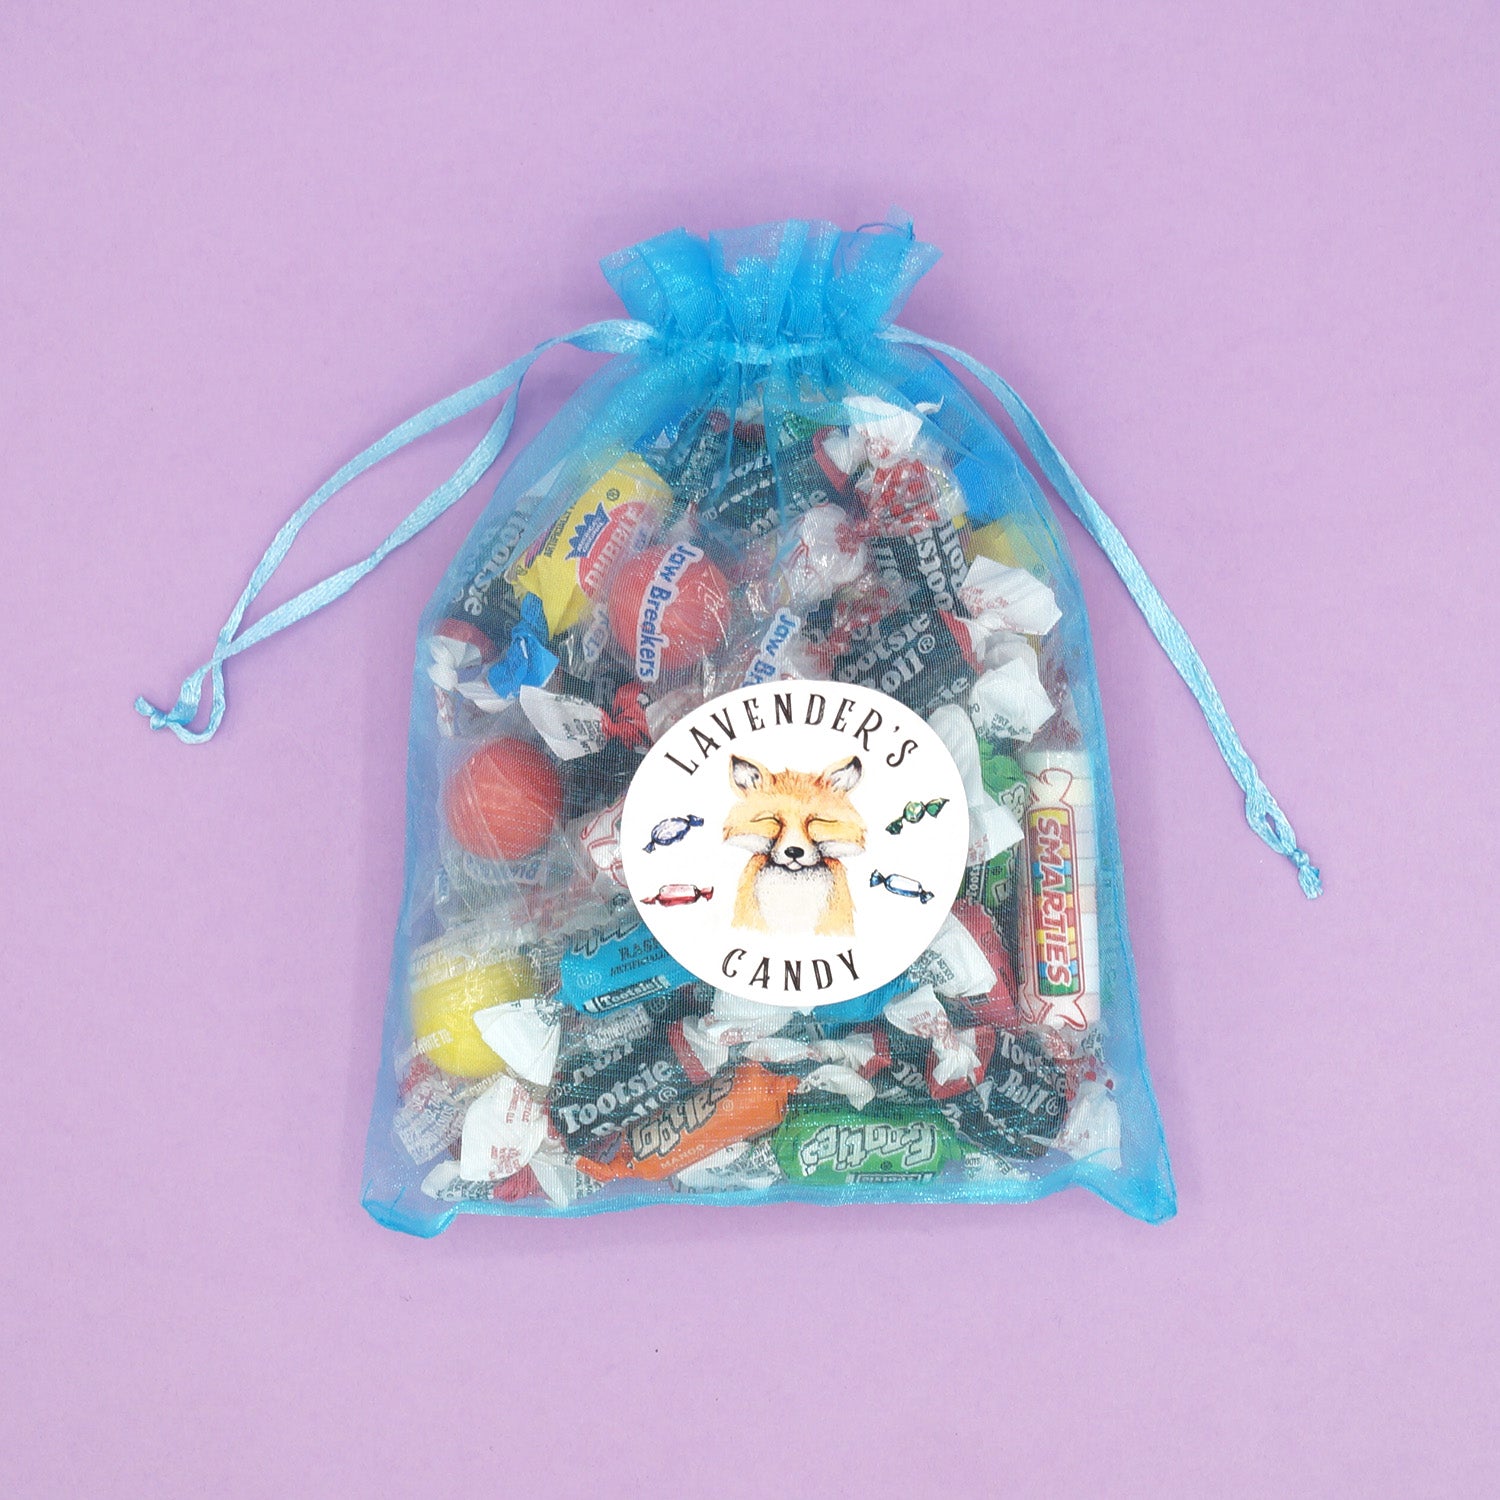 A teal organza bag filled with candy. The sticker on the front says Lavender's Candy.